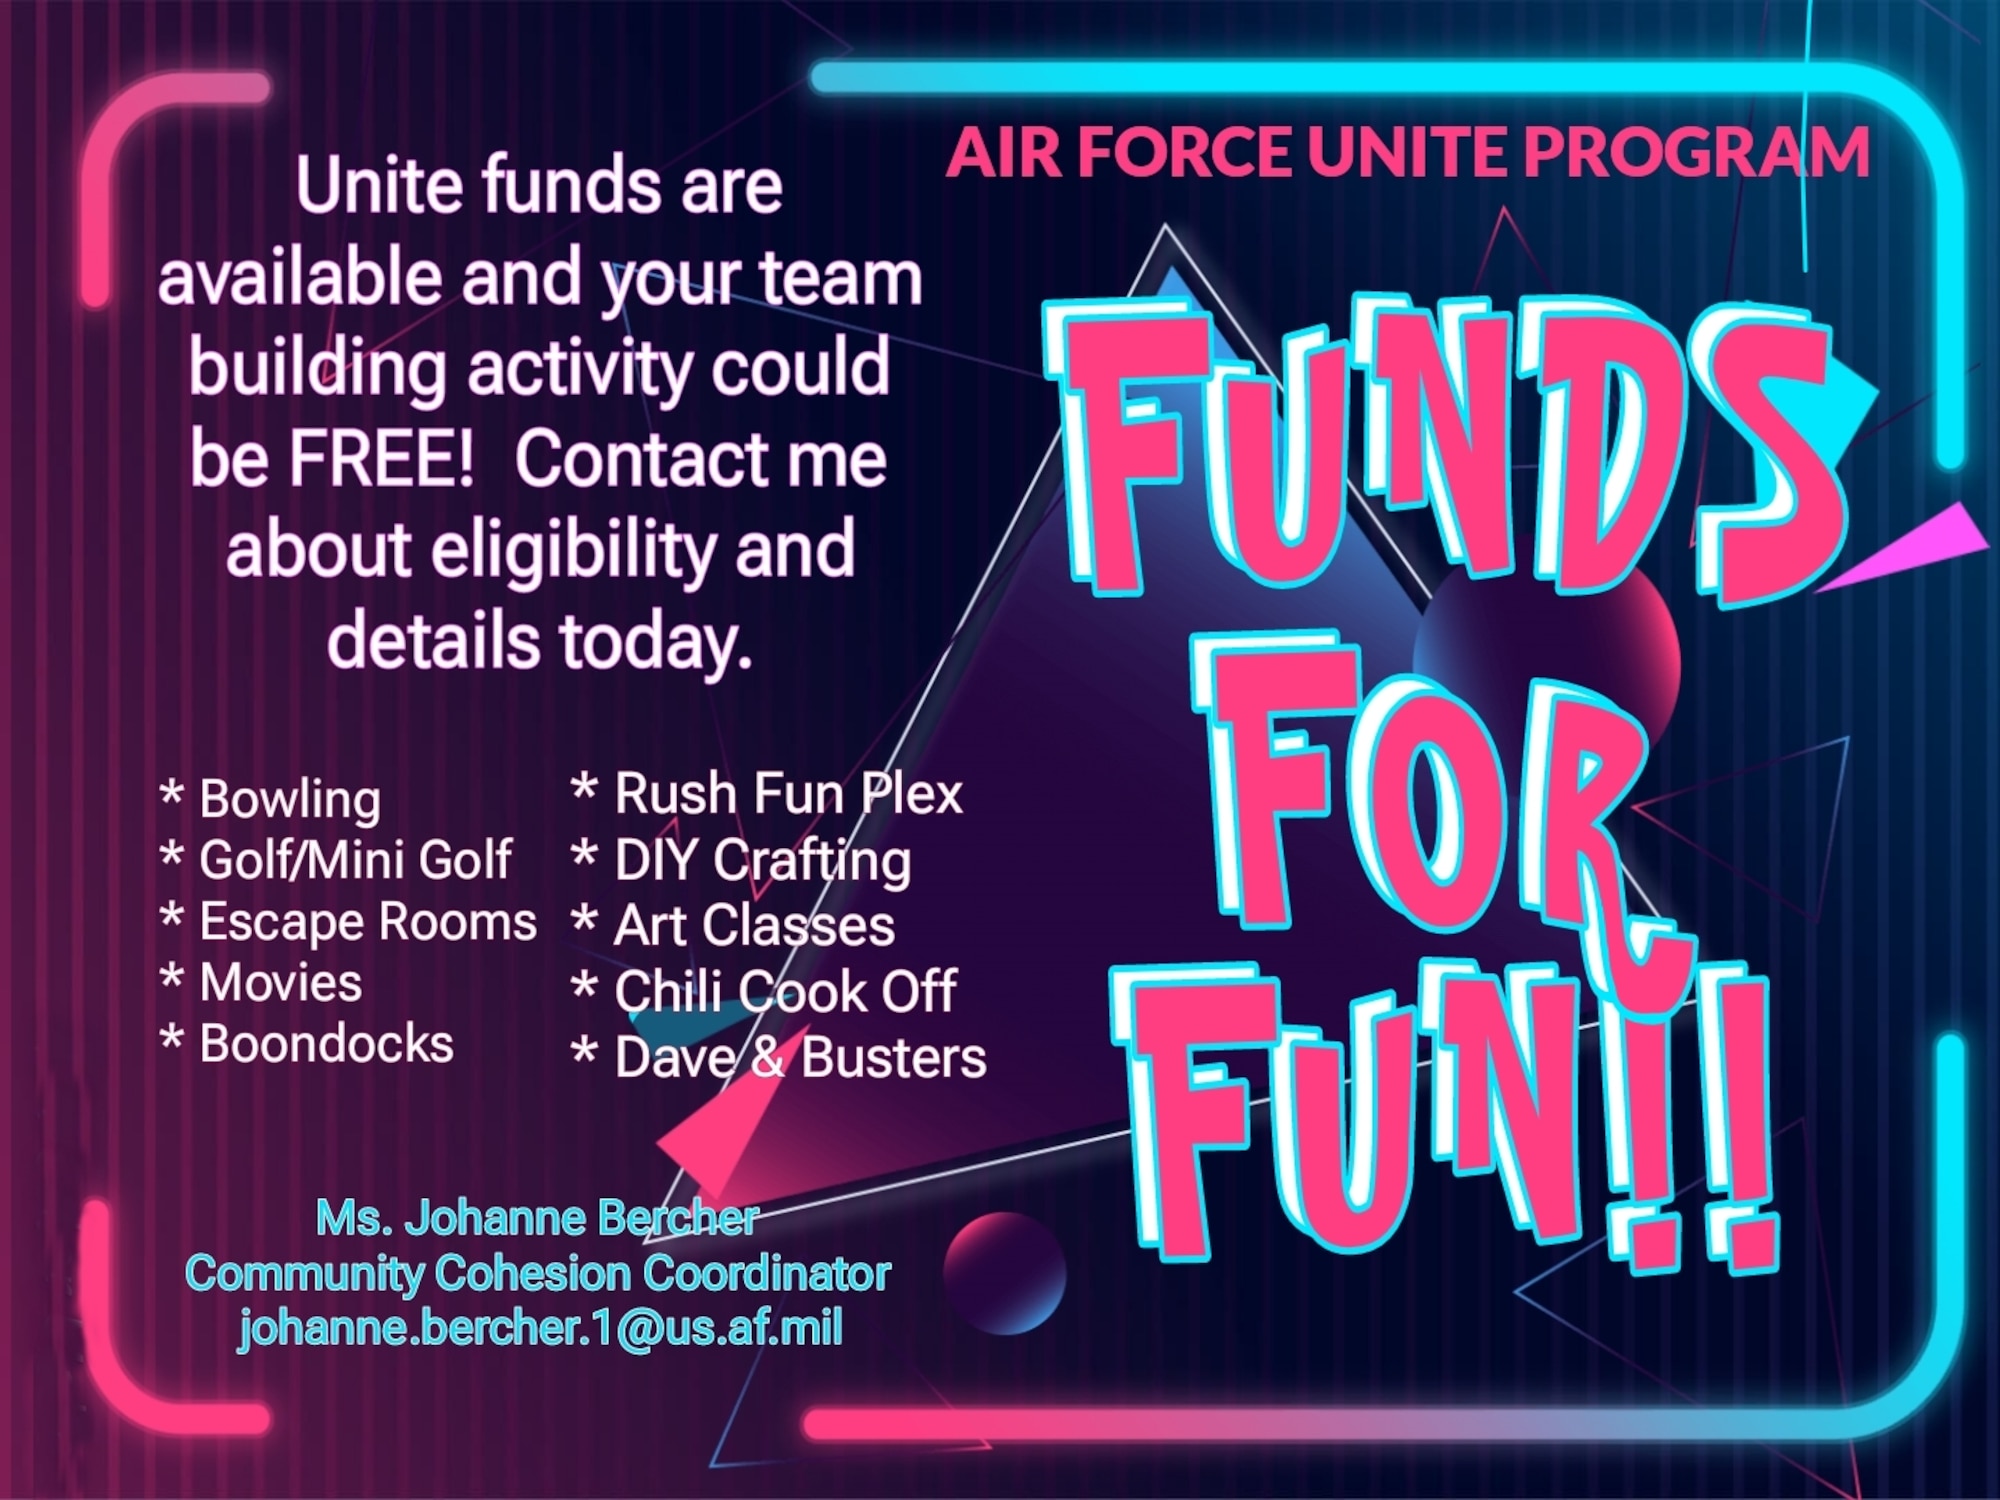 A graphic detailing the Air Force Unite program benefits.